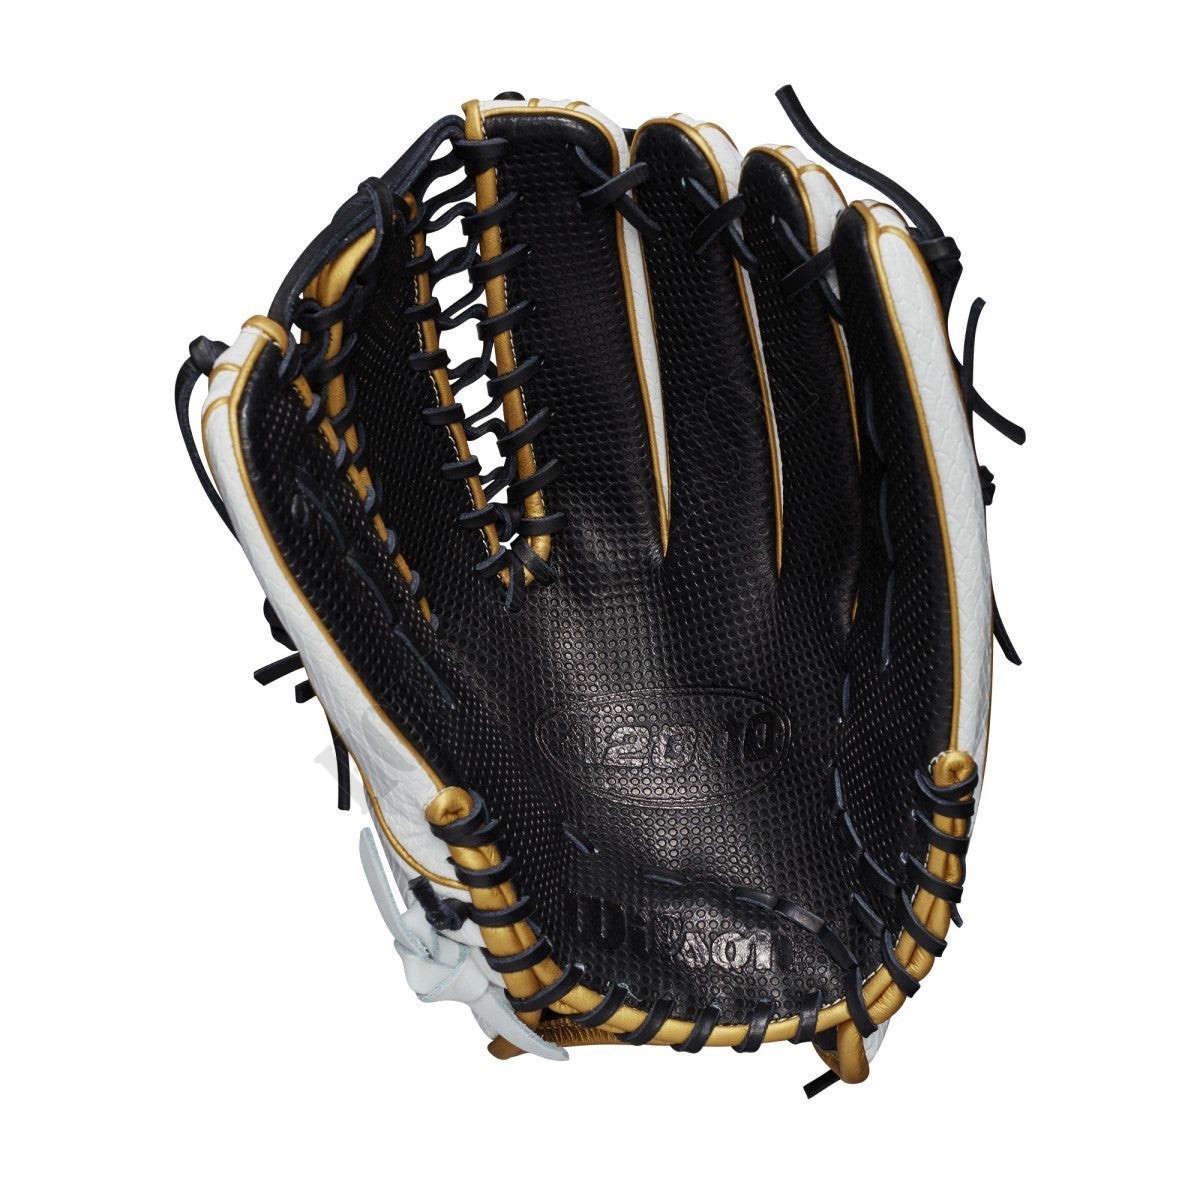 2021 A2000 OT7SS Six String 12.75" Outfield Baseball Glove ● Wilson Promotions - -2